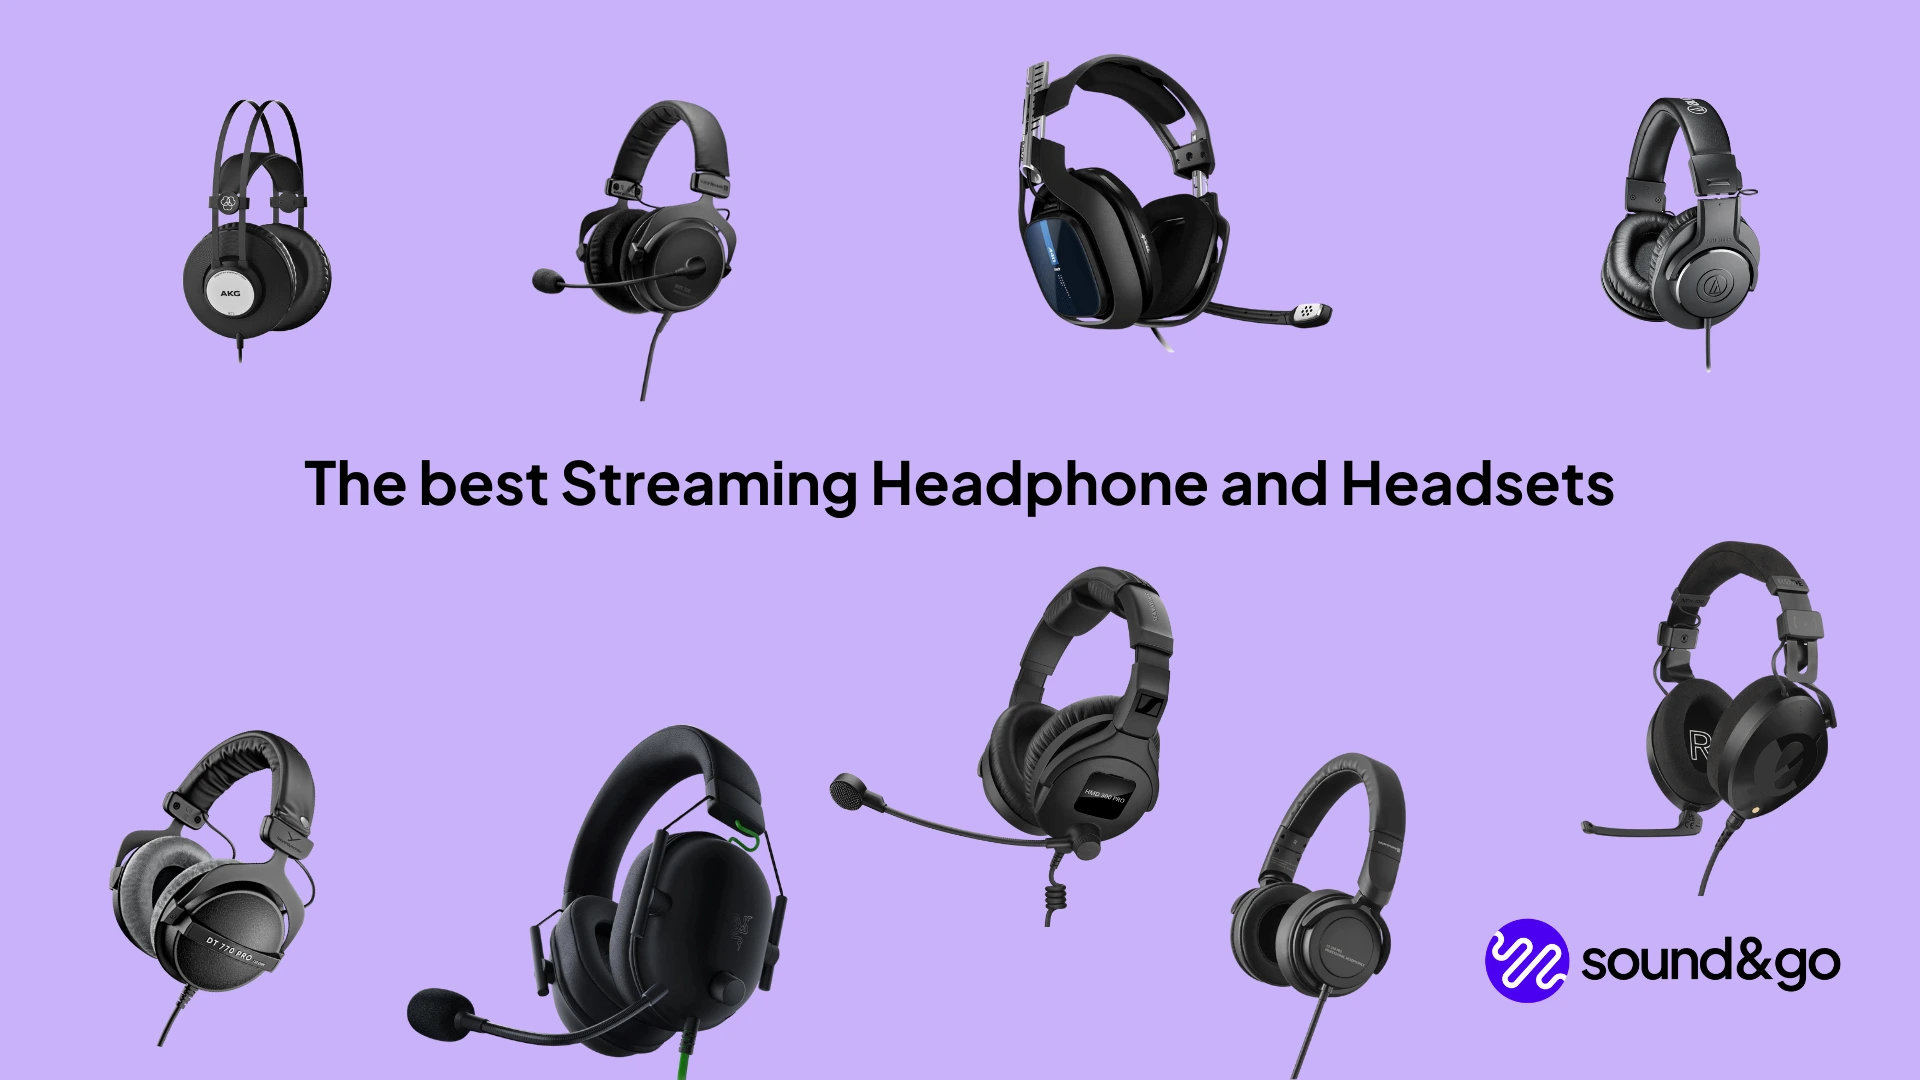 The best headphones for streaming - headsets and headphones in comparison